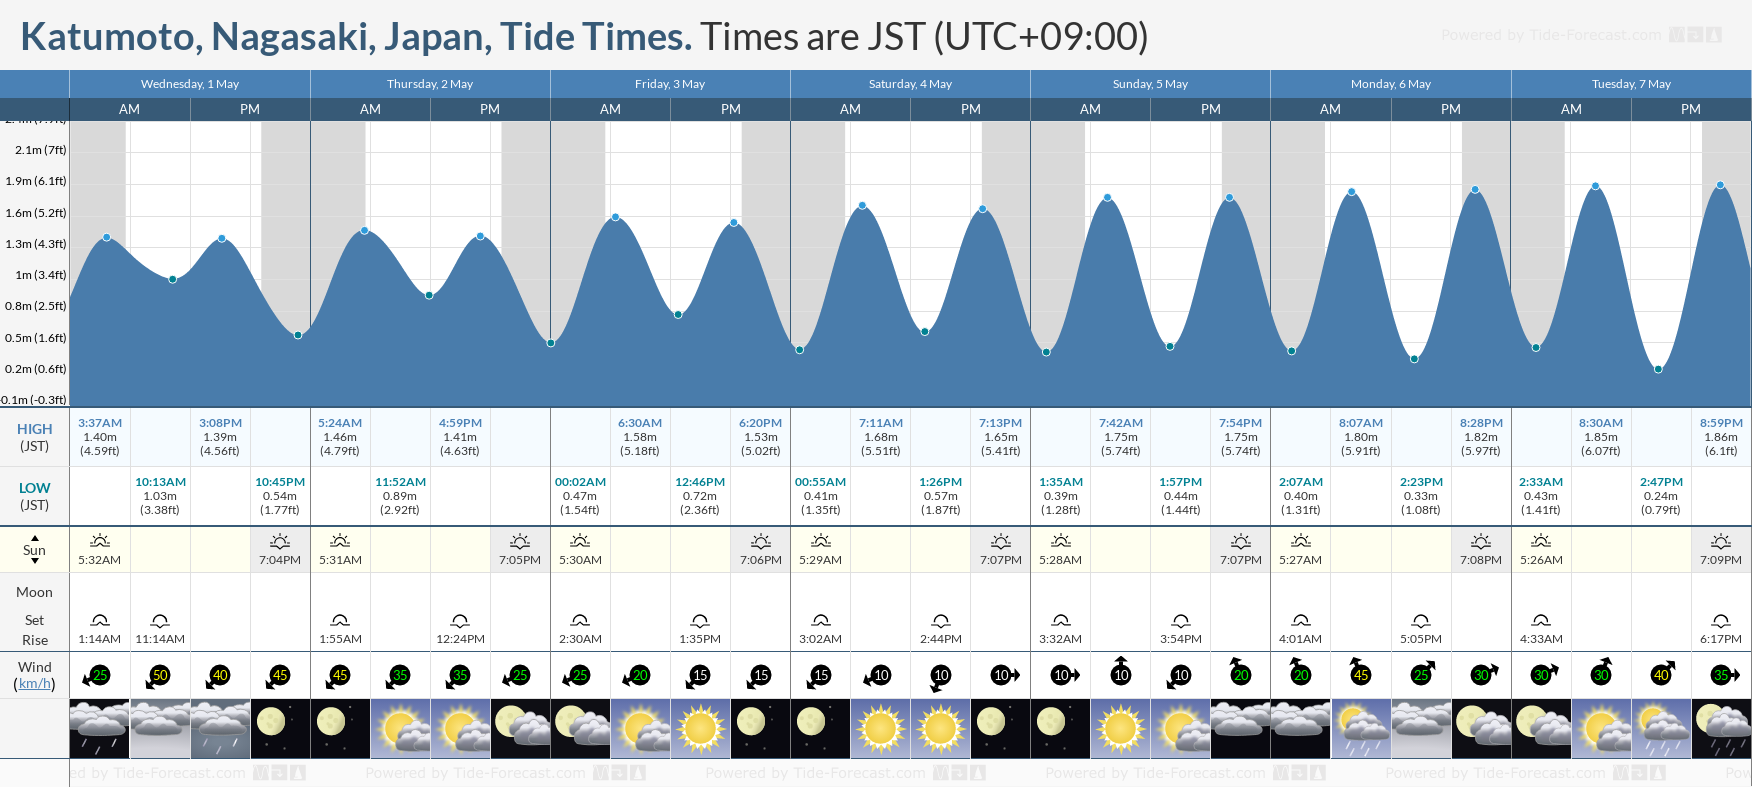 Katumoto, Nagasaki, Japan Tide Chart including high and low tide times for the next 7 days